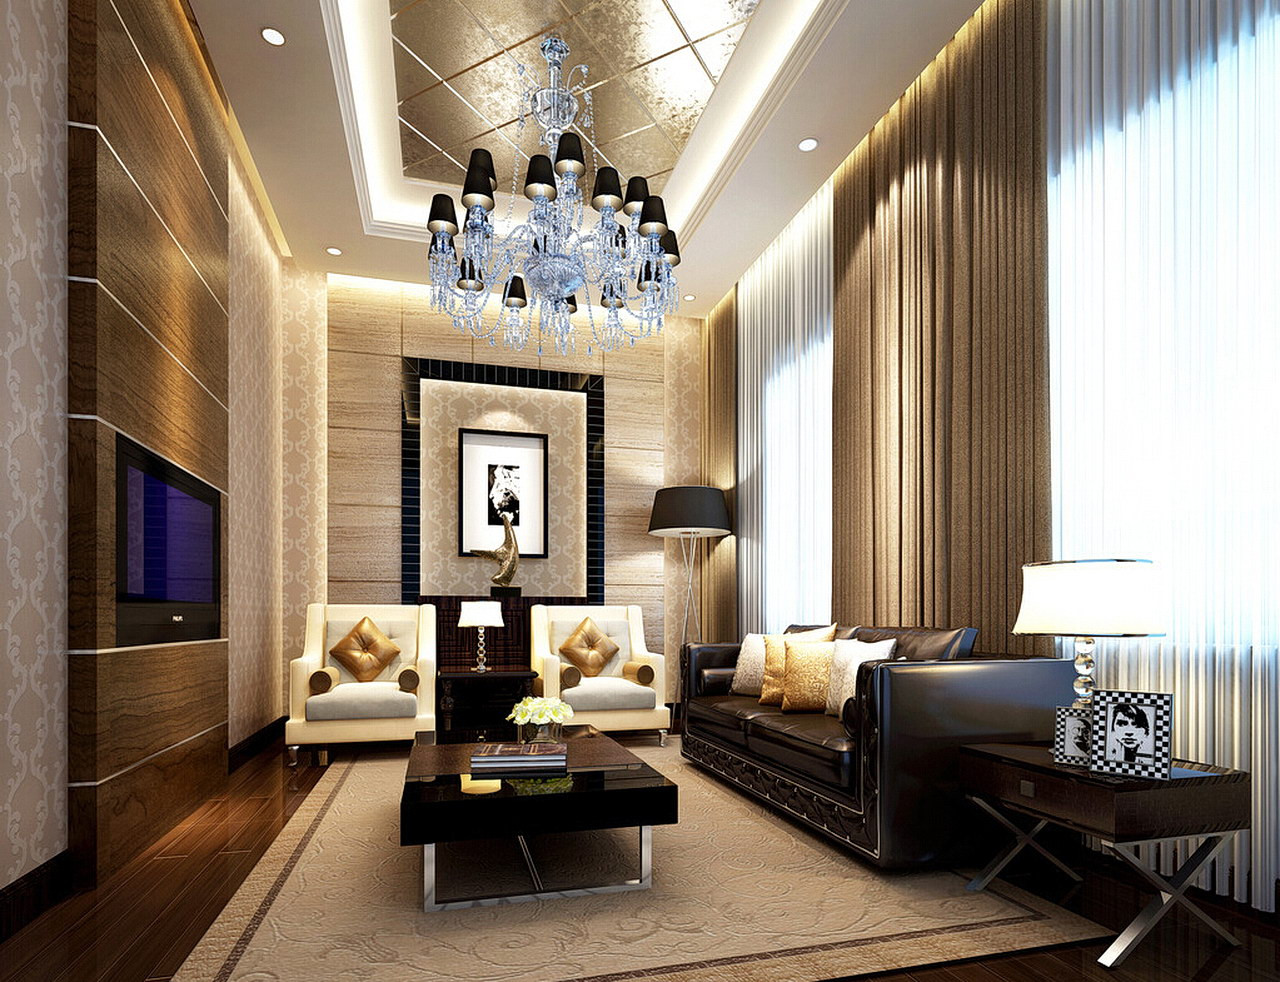 Living Room Light Fixtures Ideas
 77 really cool living room lighting tips tricks ideas